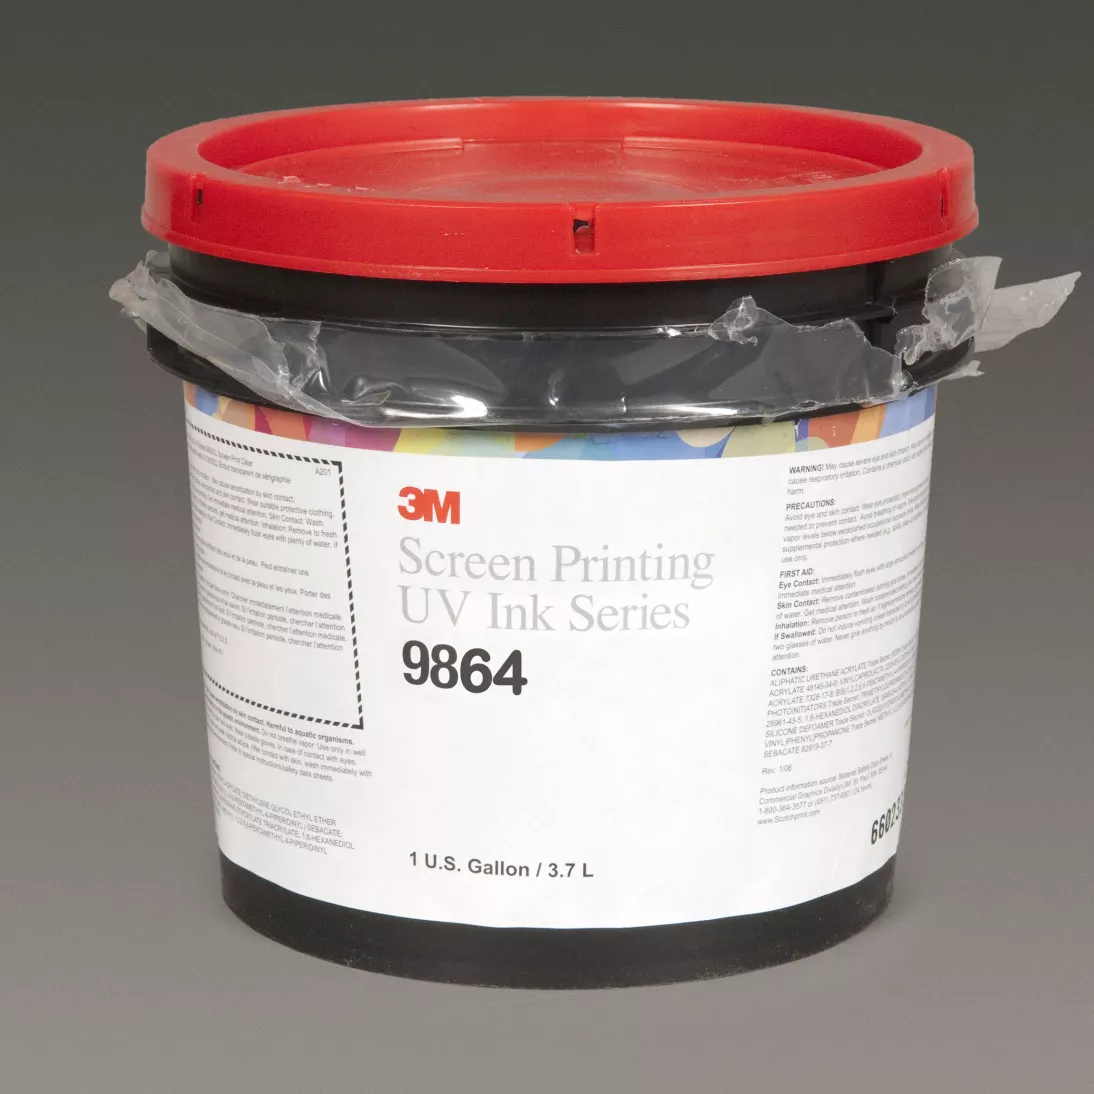 3M™ Screen Printing UV Ink 9864, Transparent Green (BS), 1 Gallon
Container